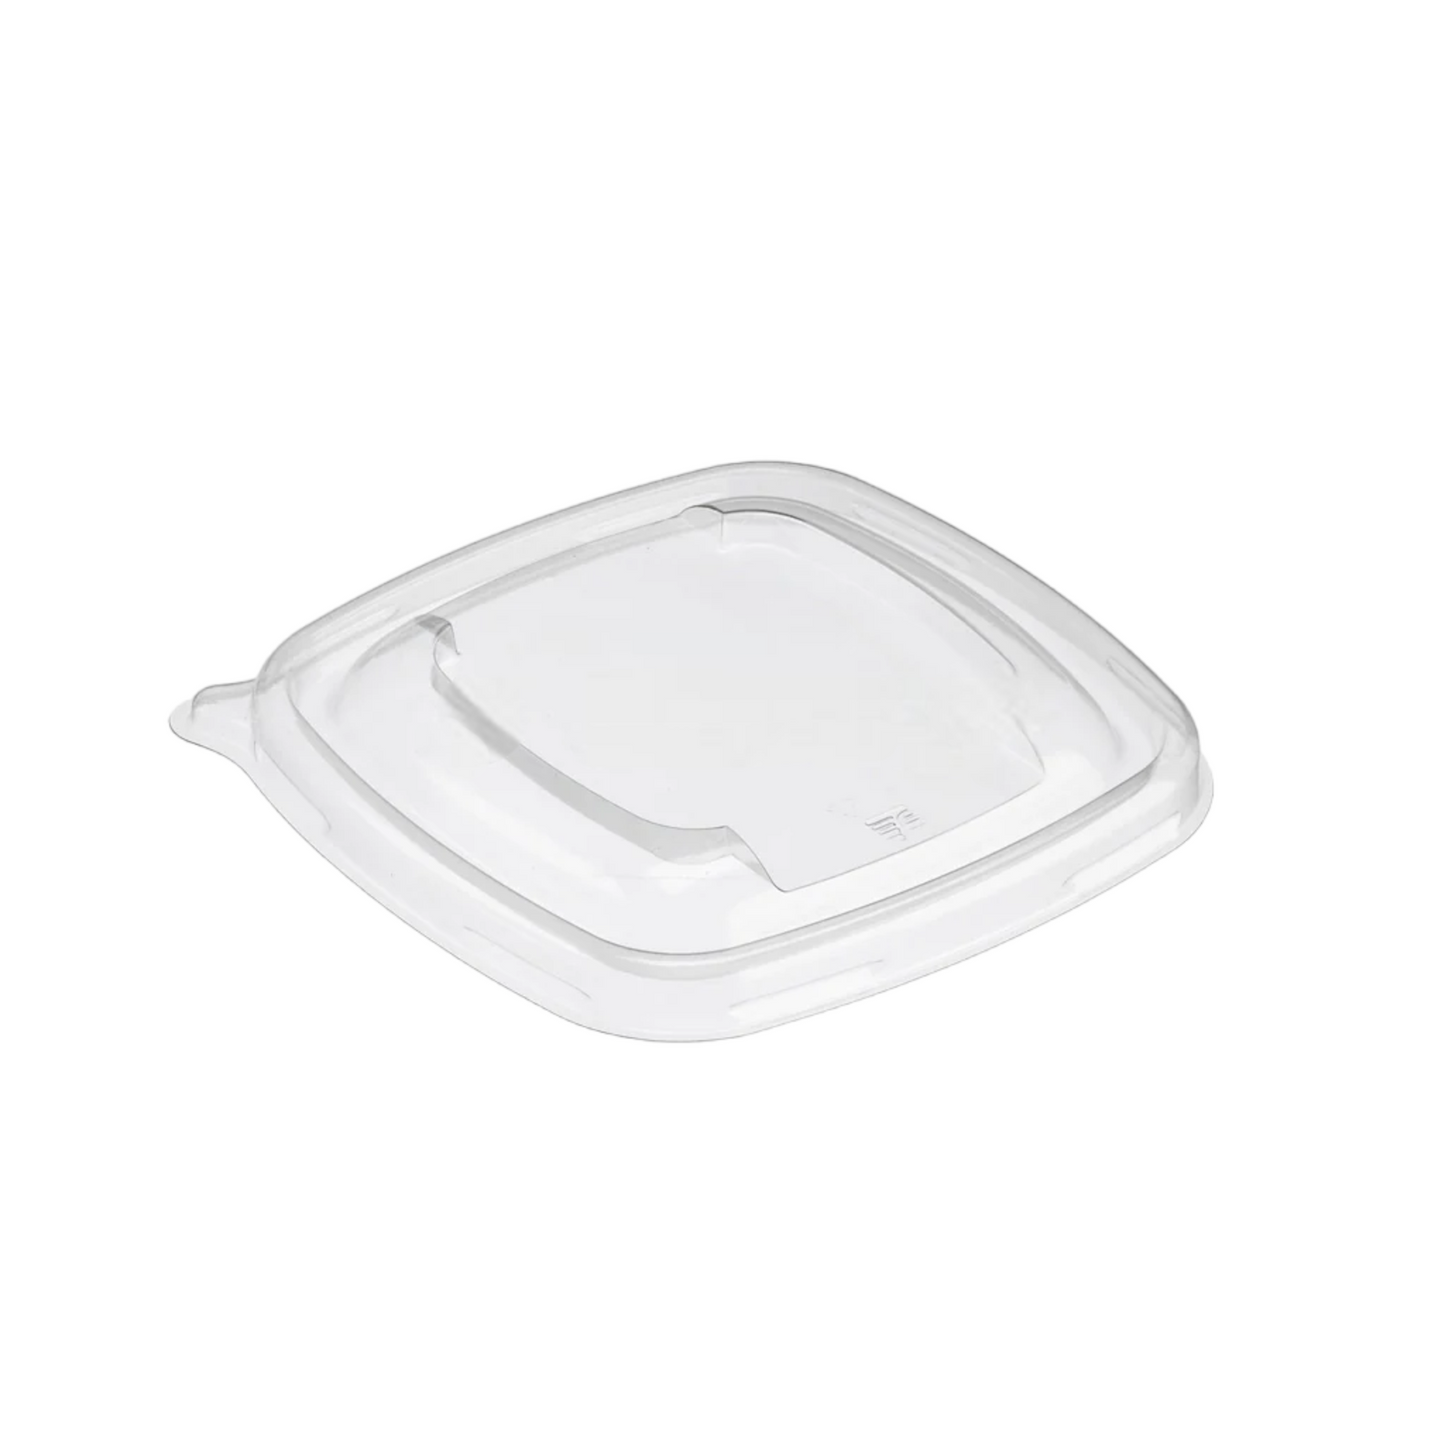 Sabert RPET Lid for Small Square Pulp Bowl